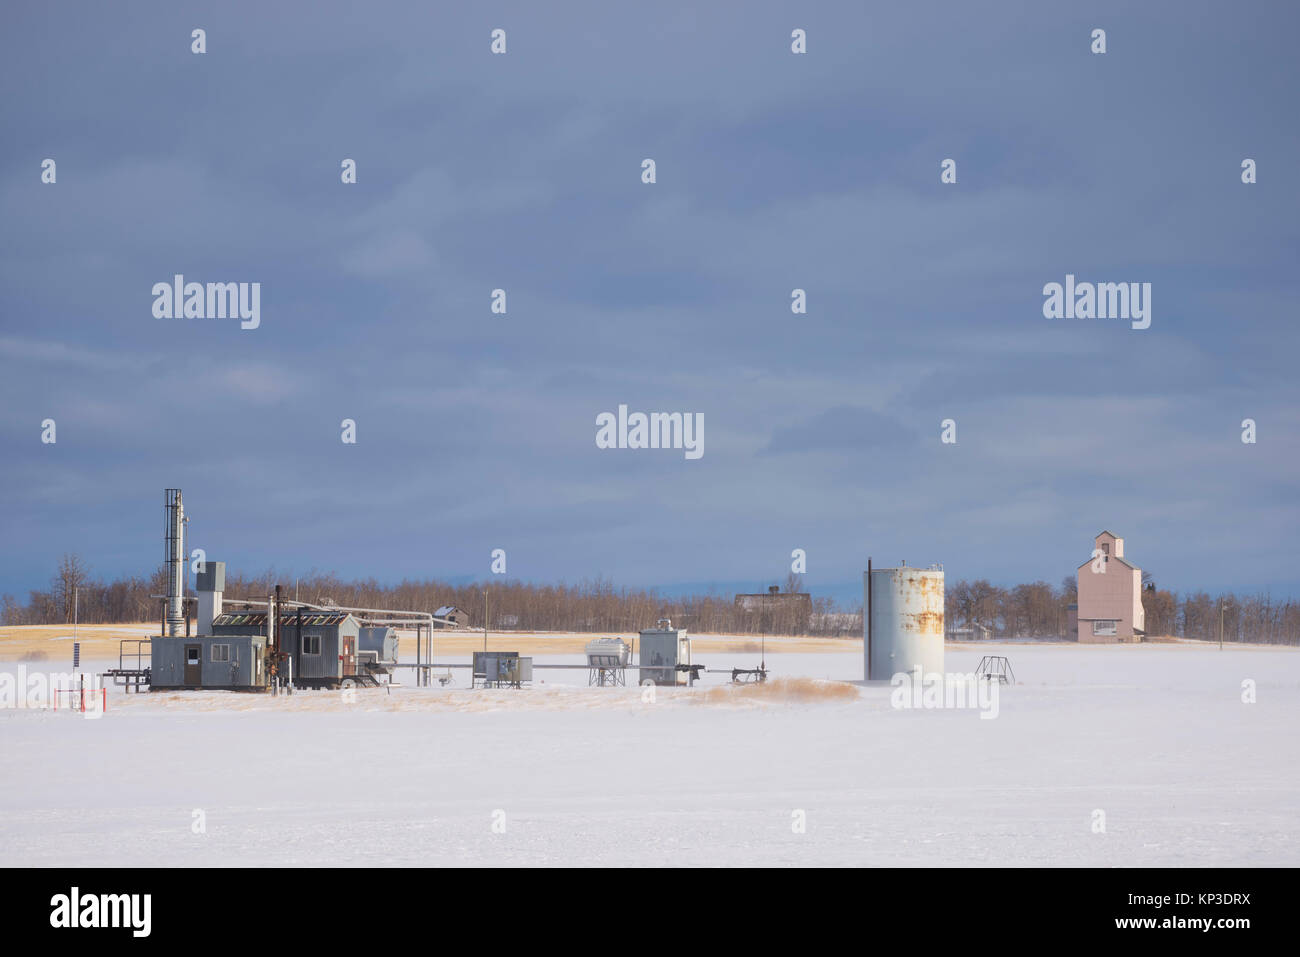 A gas and oil plant in rural Alberta Stock Photo